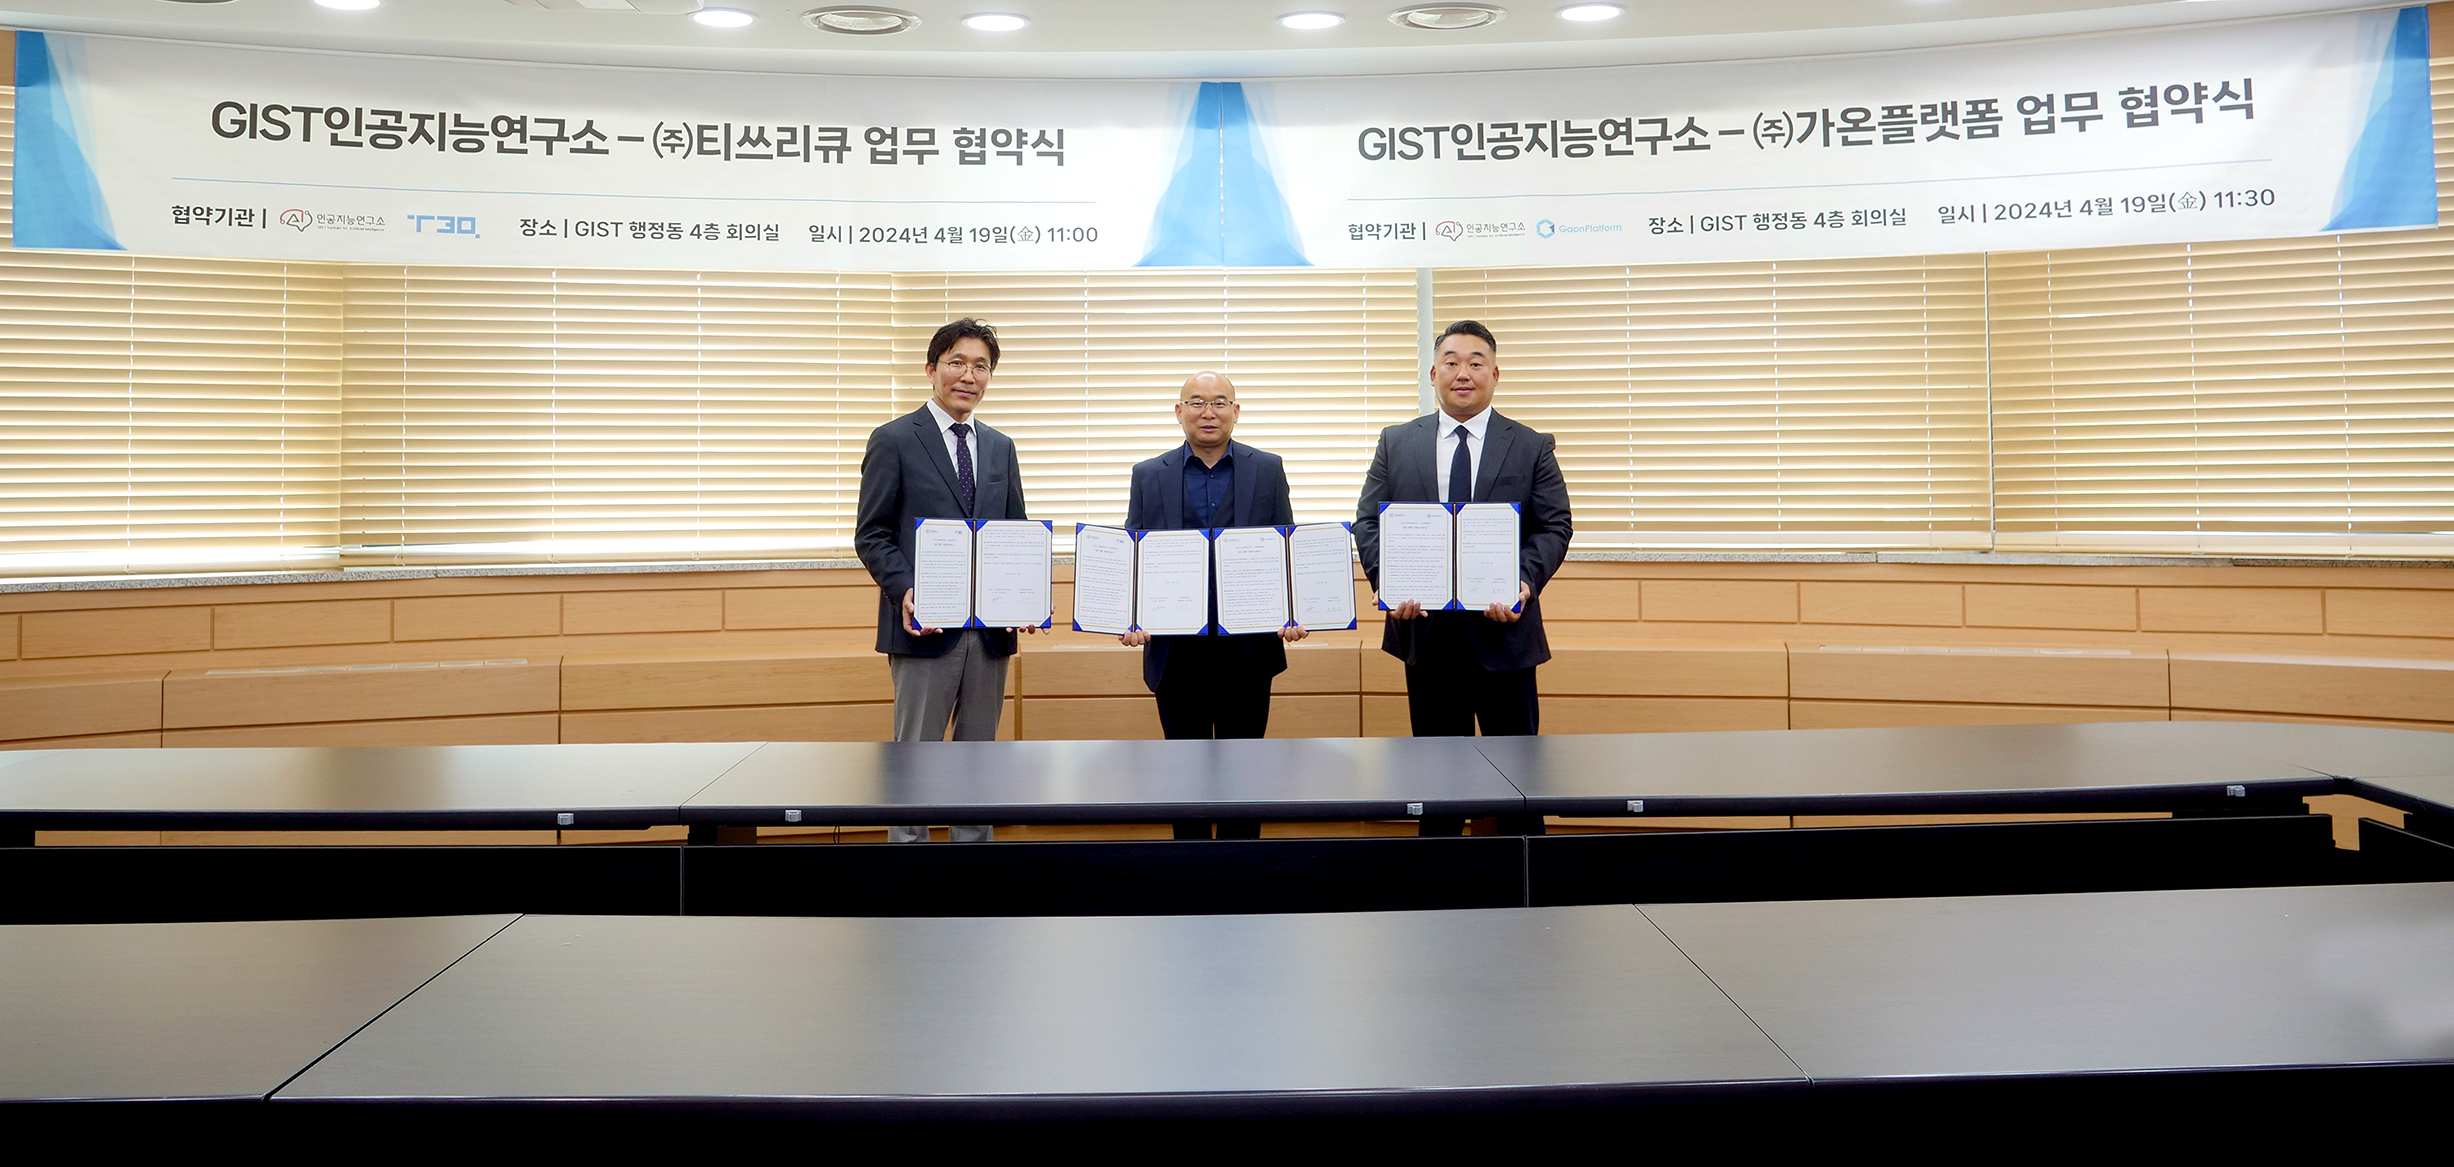 GIST, T3Q Co., Ltd., and Gaon Platform Co., Ltd. are working to develop an integrated artificial intelligence and big data platform to realize smart industries 이미지